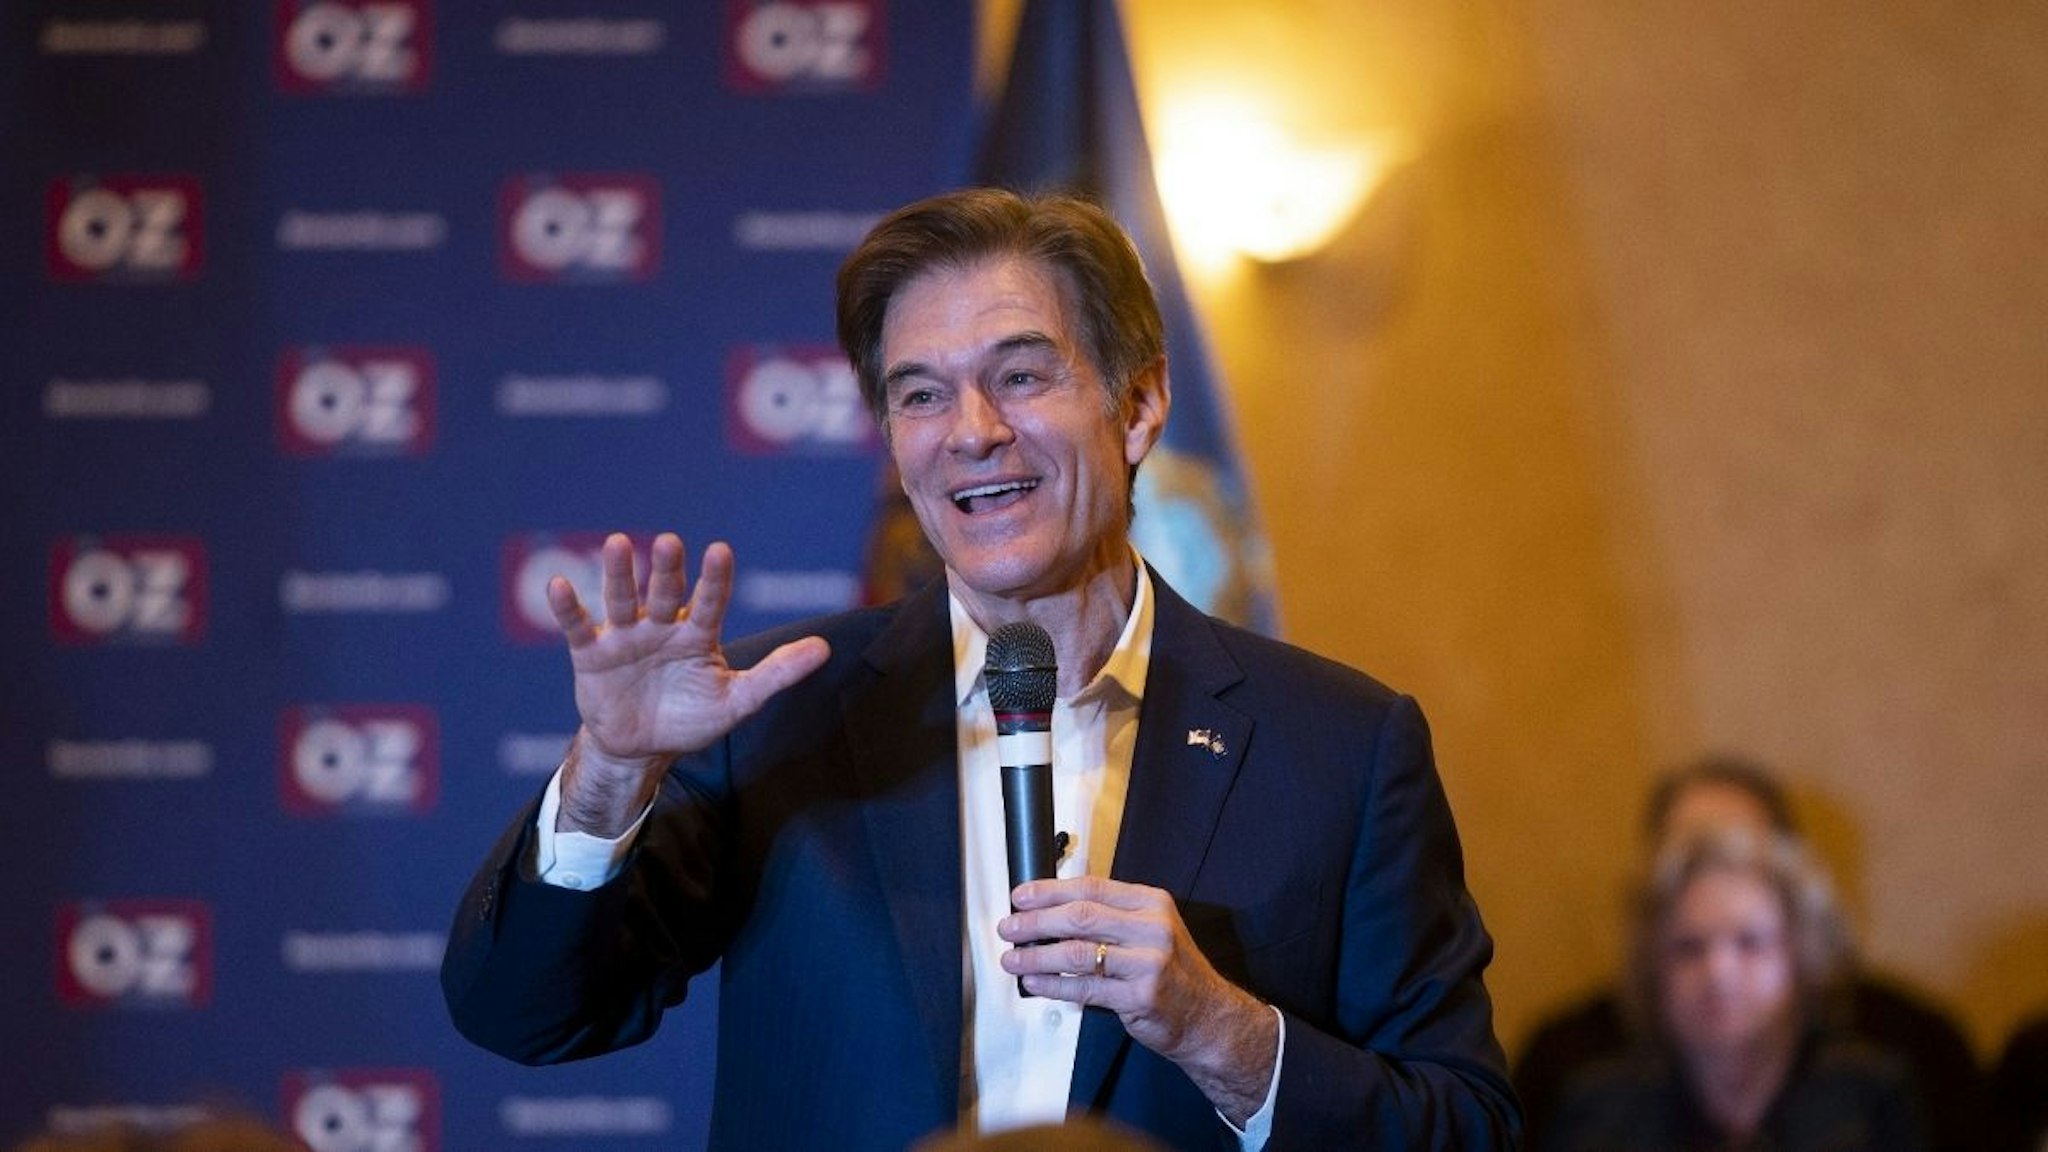 Mehmet Oz, celebrity physician and U.S. Republican Senate candidate for Pennsylvania, speaks during a campaign event at a restaurant in Greensburg, Pennsylvania, U.S., on Wednesday, Jan. 26, 2022.